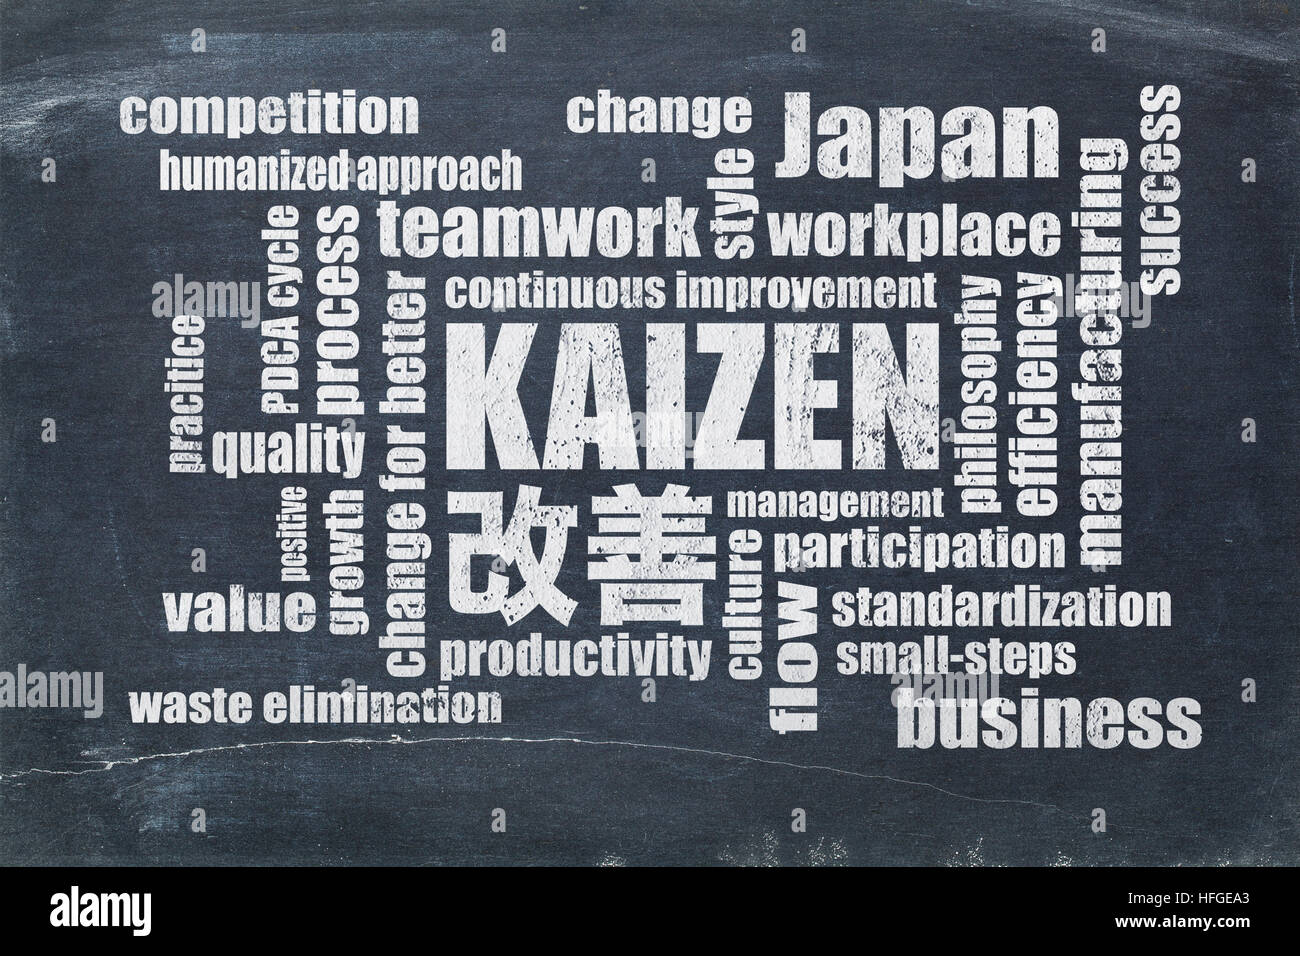 Kaizen - Japanese continuous improvement concept - word cloud  on a slate blackboard Stock Photo